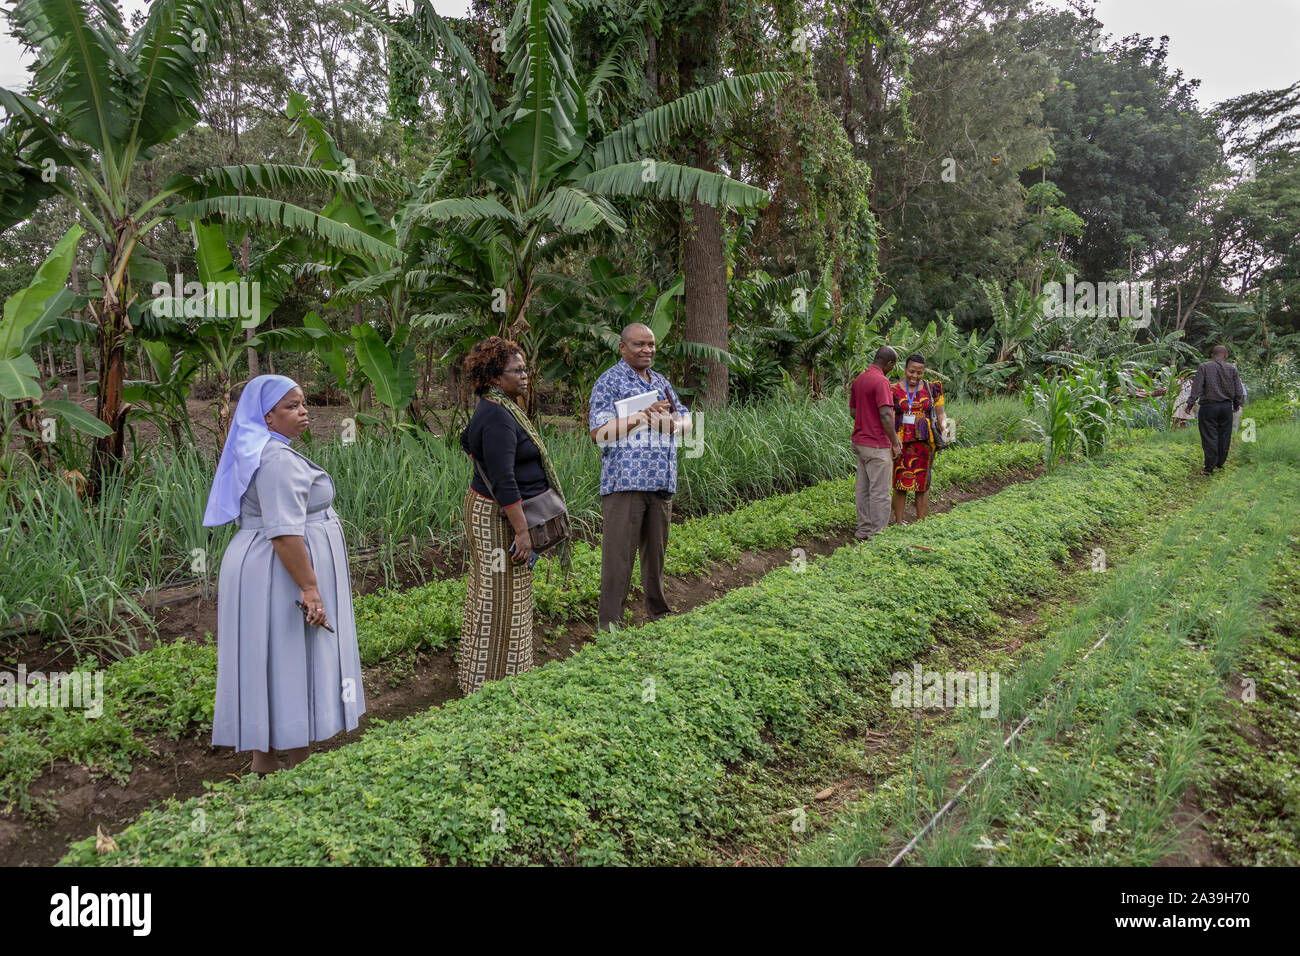 Visit of agricultural experts to vegetable farm in Arusha, Tanzania Stock Photo